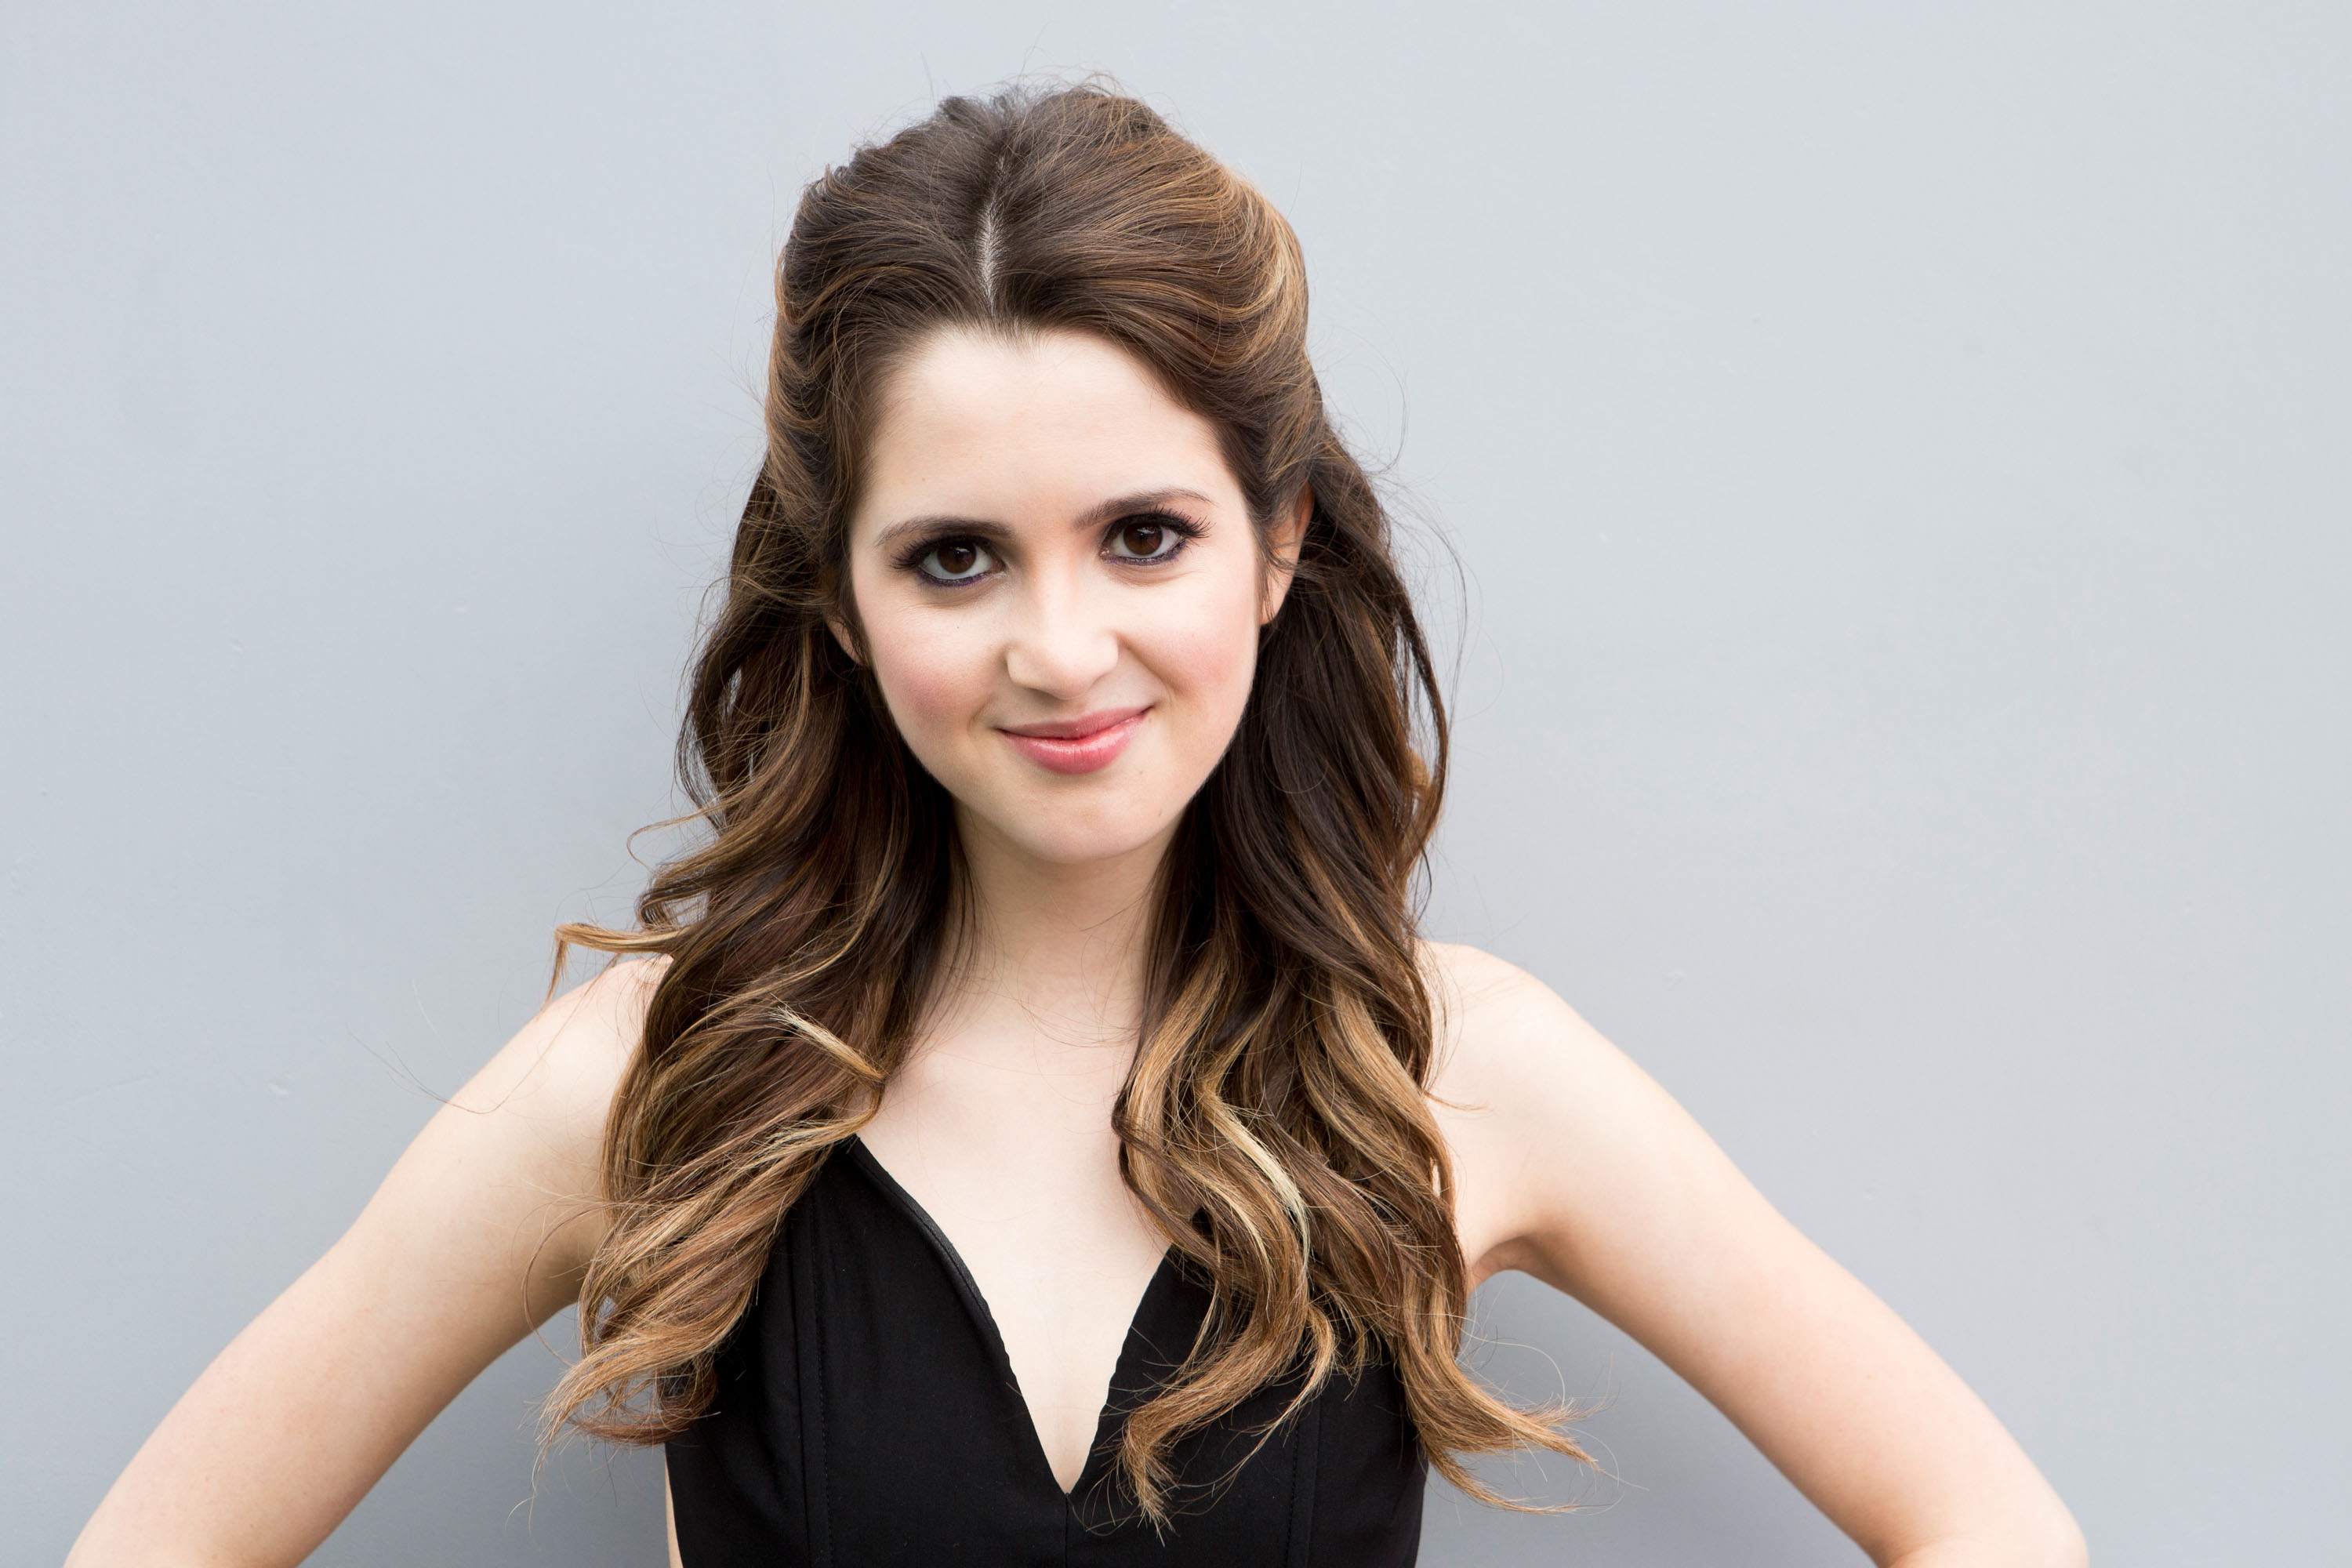 Laura Marano Backgrounds, Compatible - PC, Mobile, Gadgets| 3000x2000 px